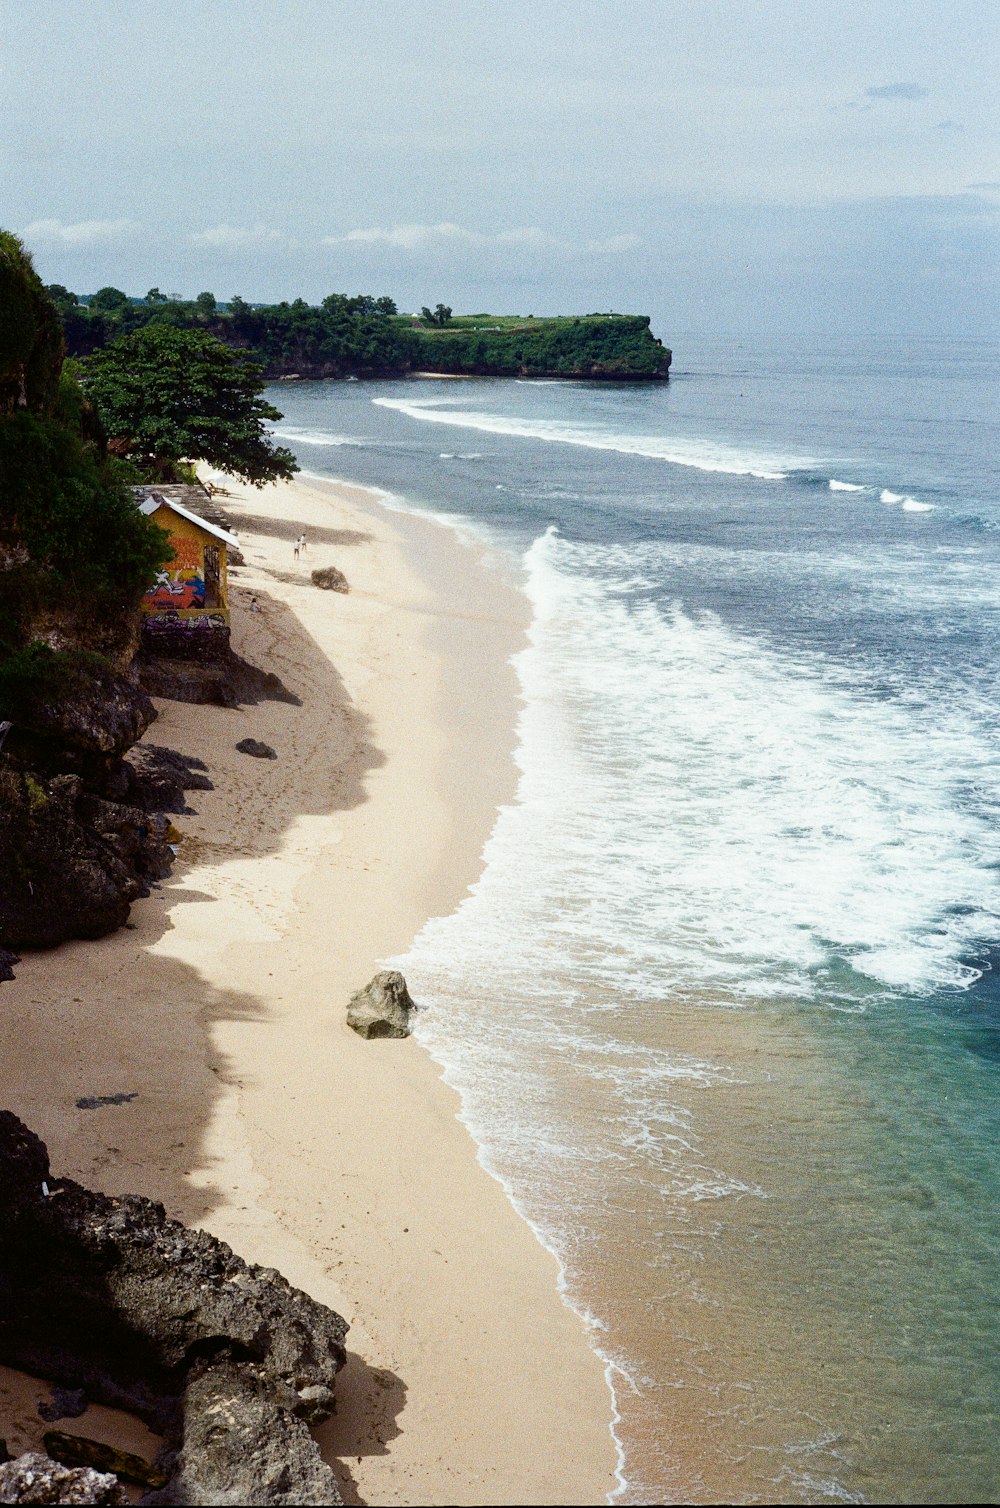 a view of a sandy beach with waves coming in from the ocean